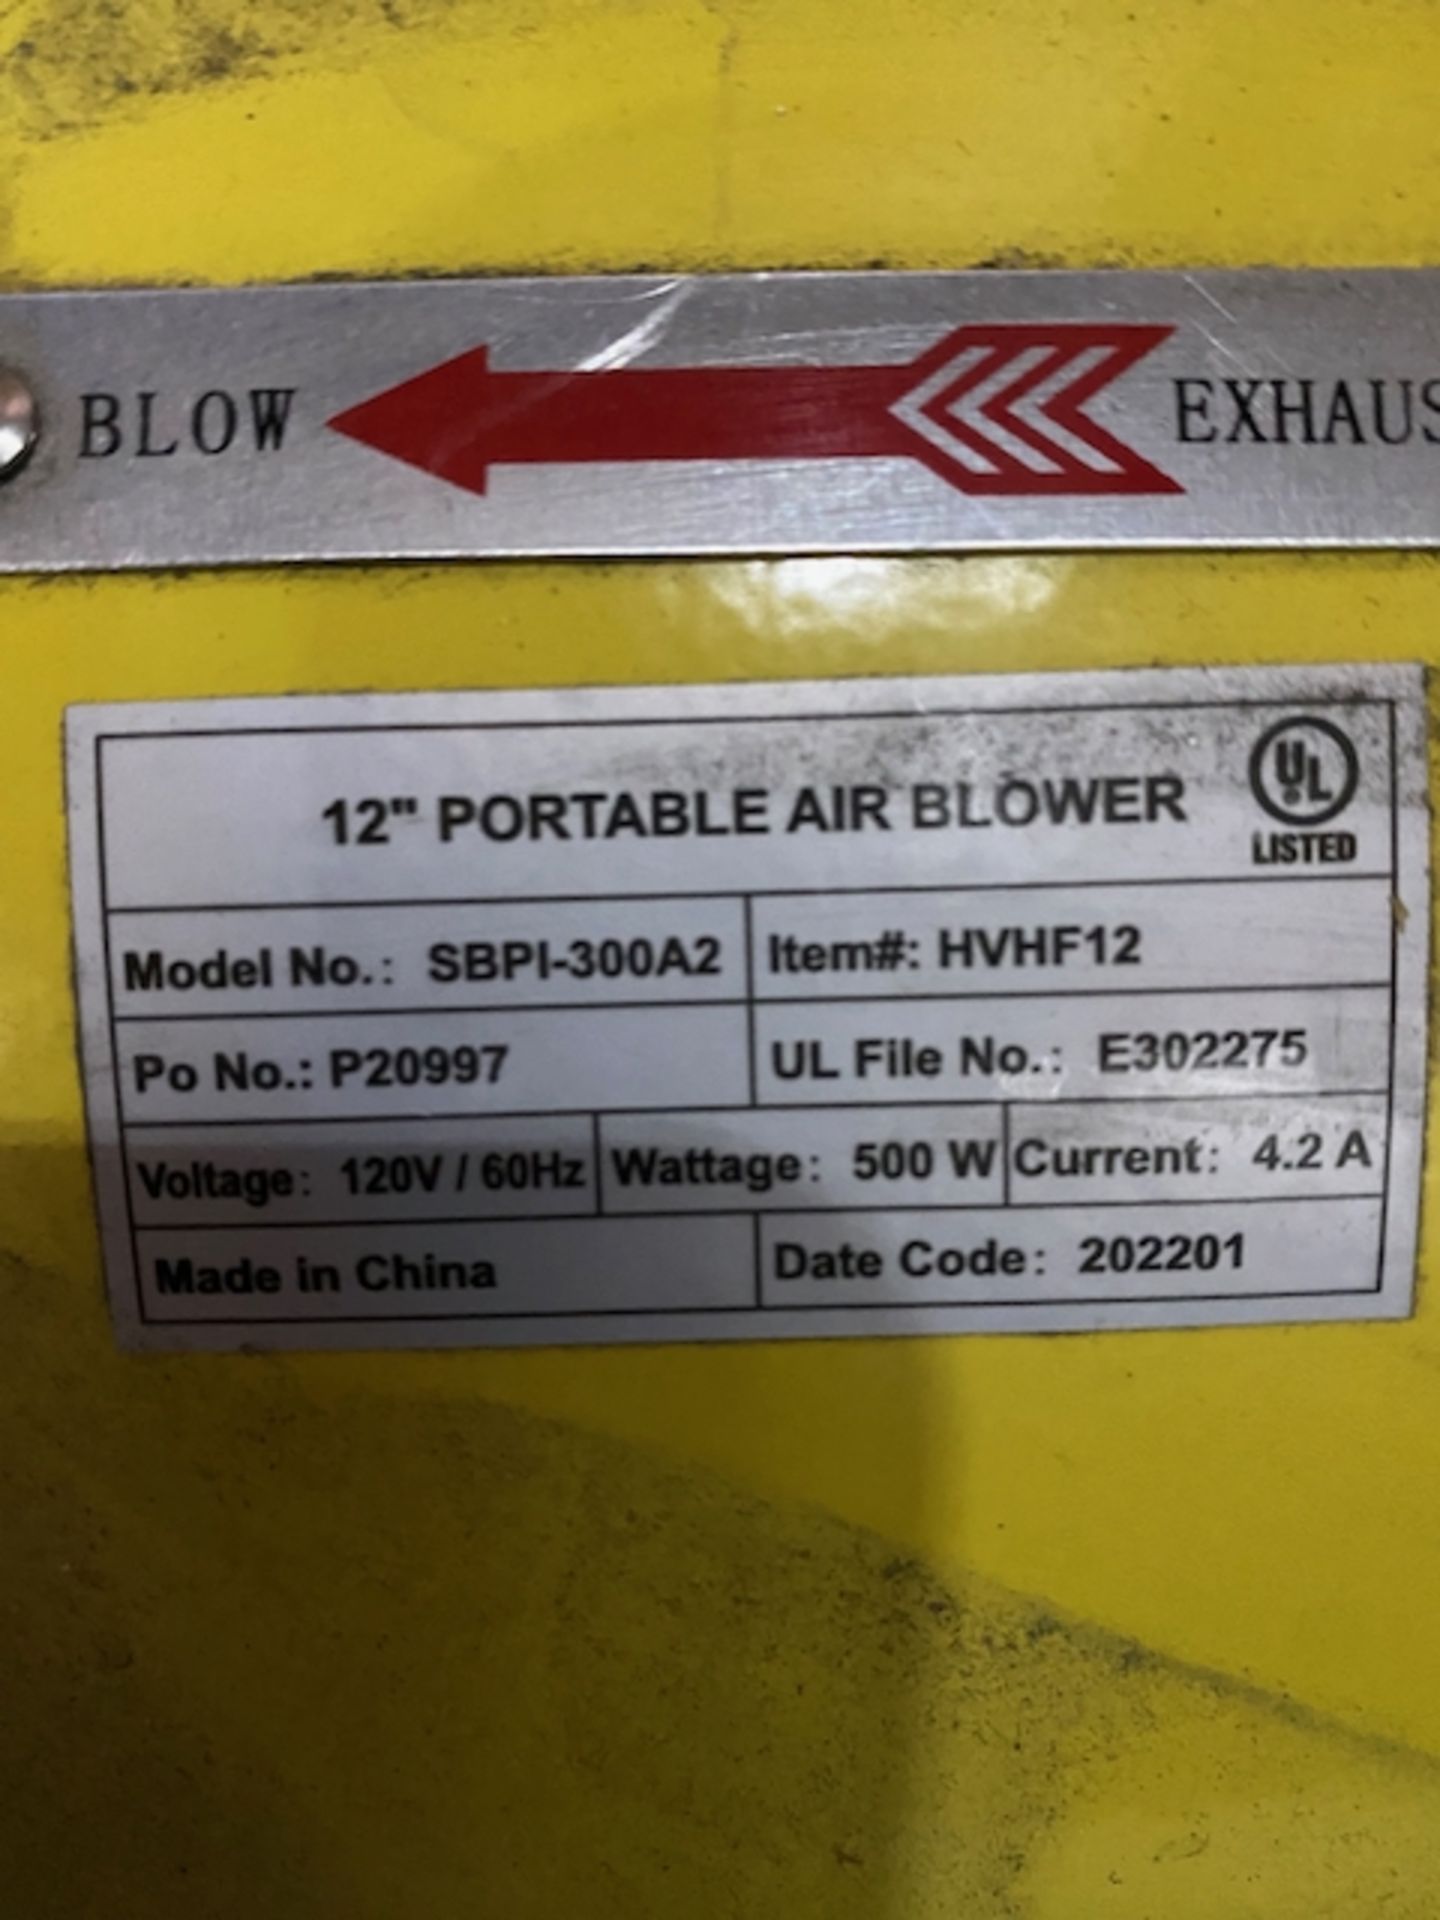 Portable Air Blower Global Industrial Model Sbpi-300A2 with 12 Ft Flexible Hose | Rig Fee $15 - Image 2 of 4